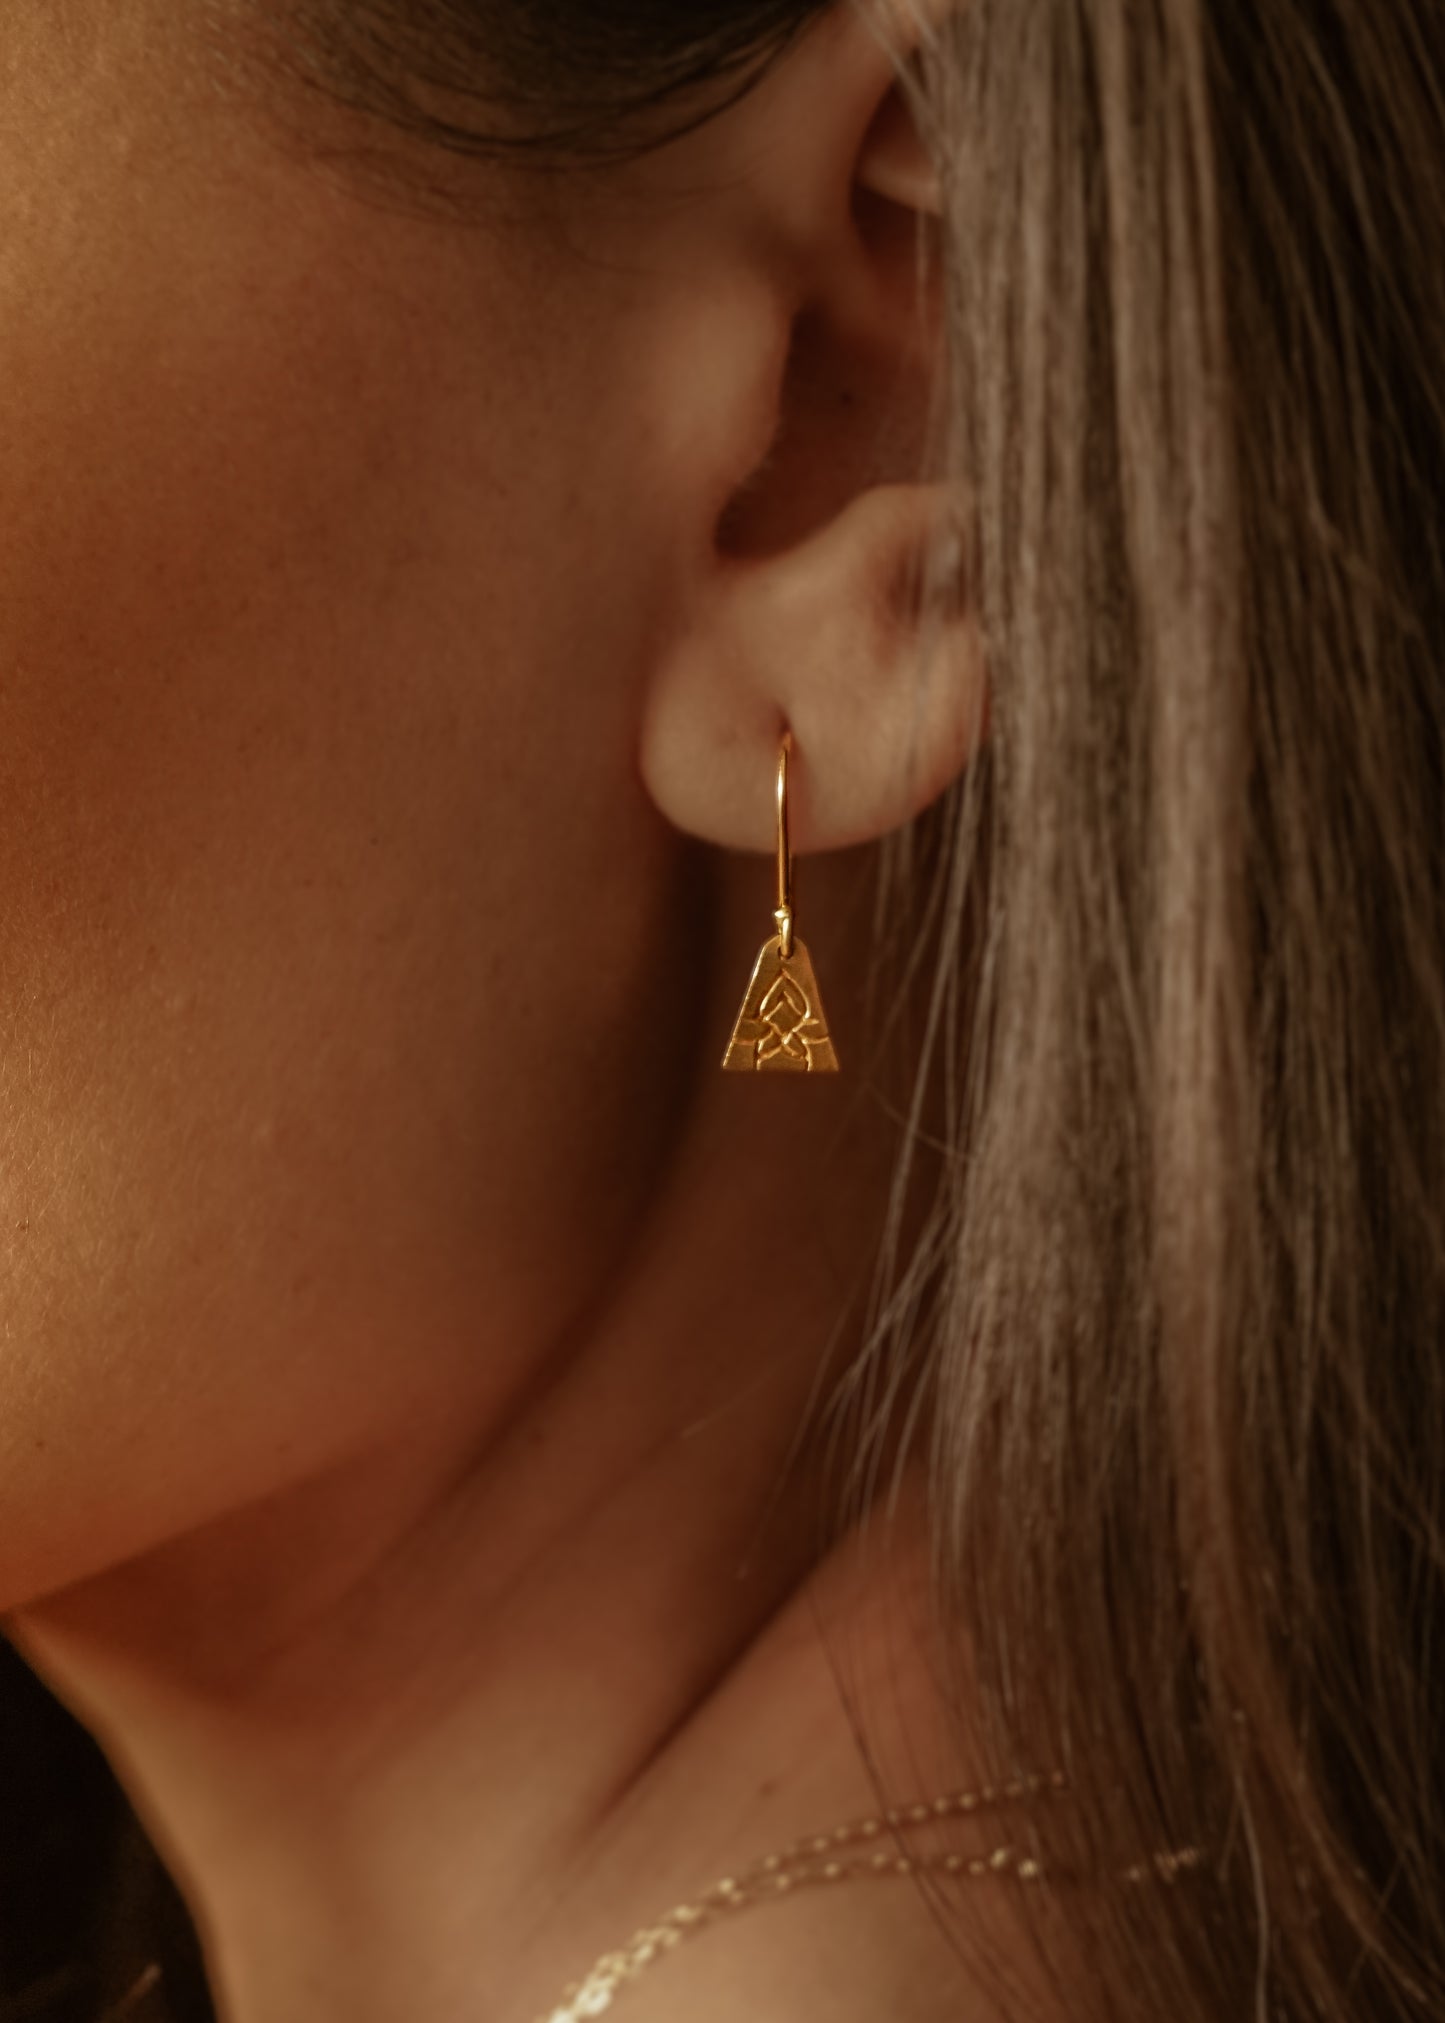 Inspired by the daily ritual of this water flower to rise from the mud and bloom to its full potential, the golden triangles of the Lotus earring flutter with each turn of the head, showcasing delicate petals that whisper of an understated beauty. 